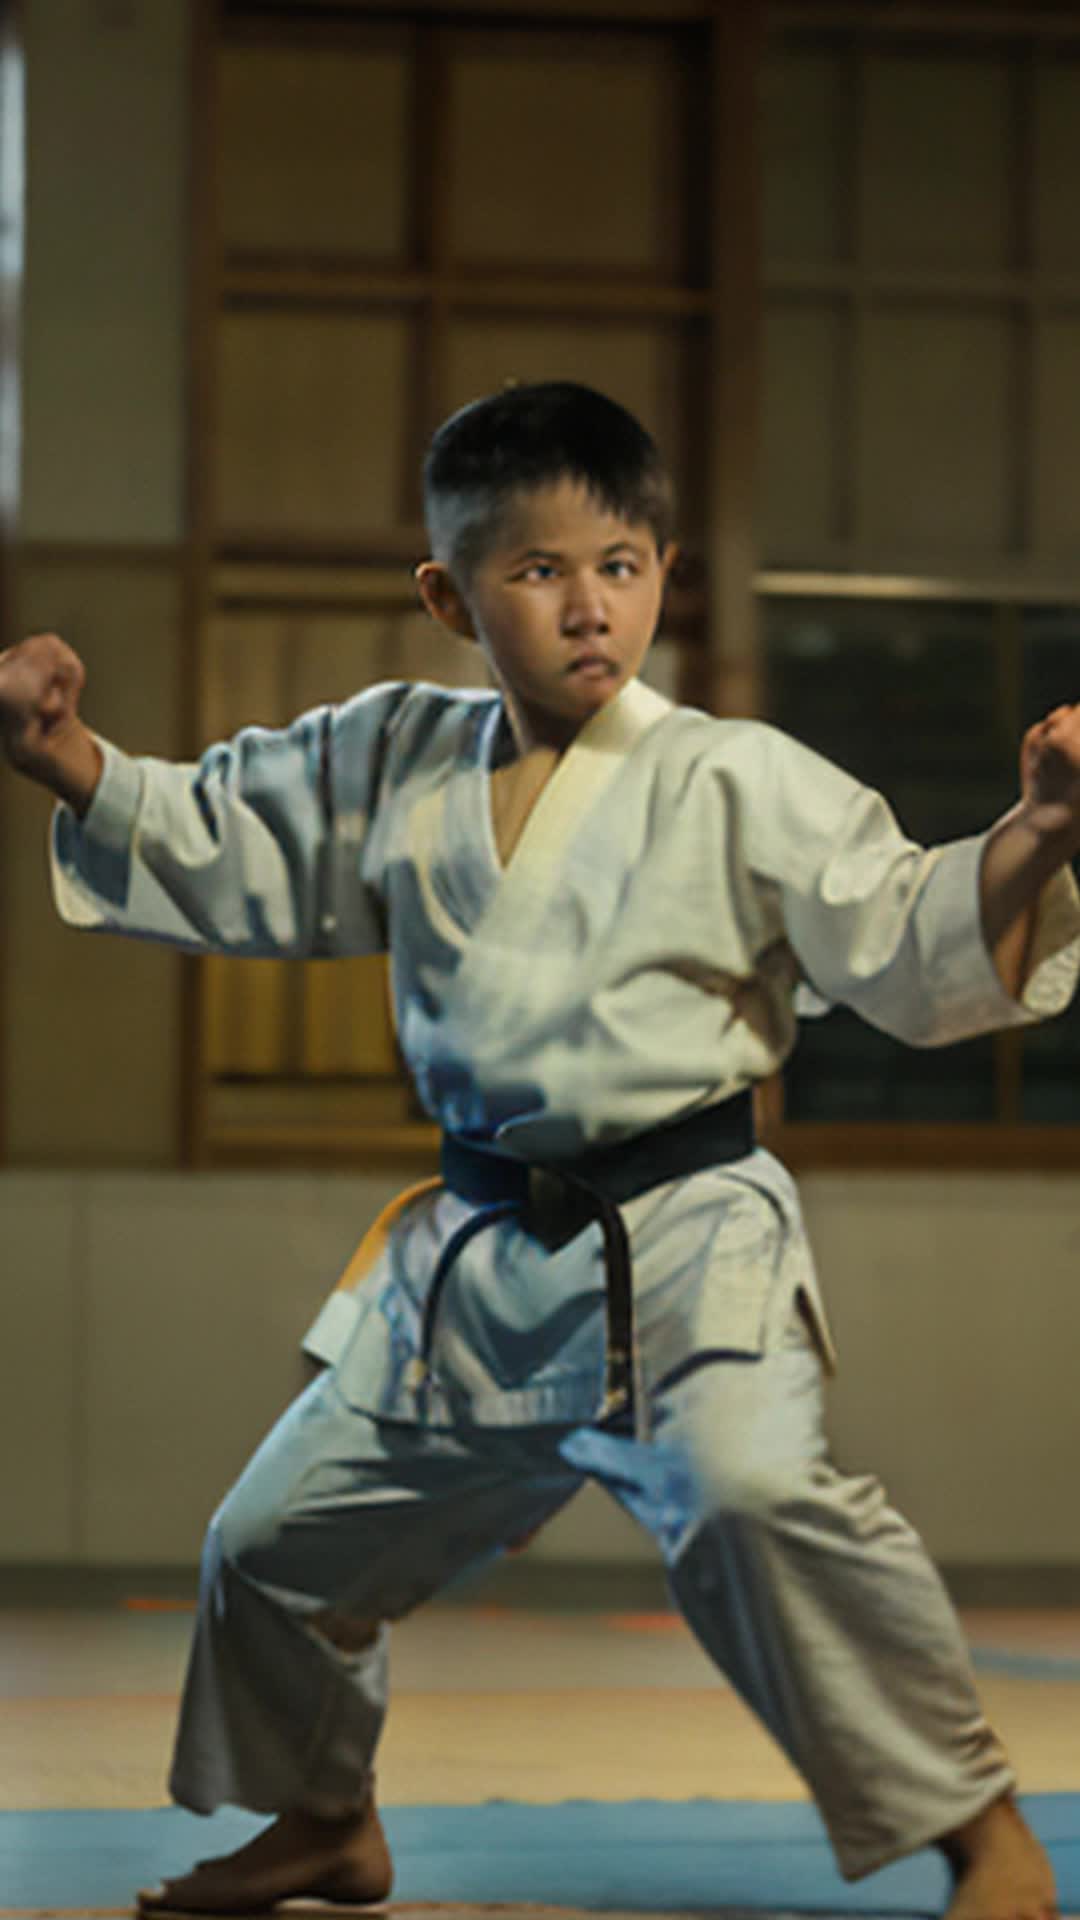 Karate master boy, precise powerful moves, demonstrates kata, dojo background, onlookers in awe, training mats, ceremonial banners, naturally lit, high resolution